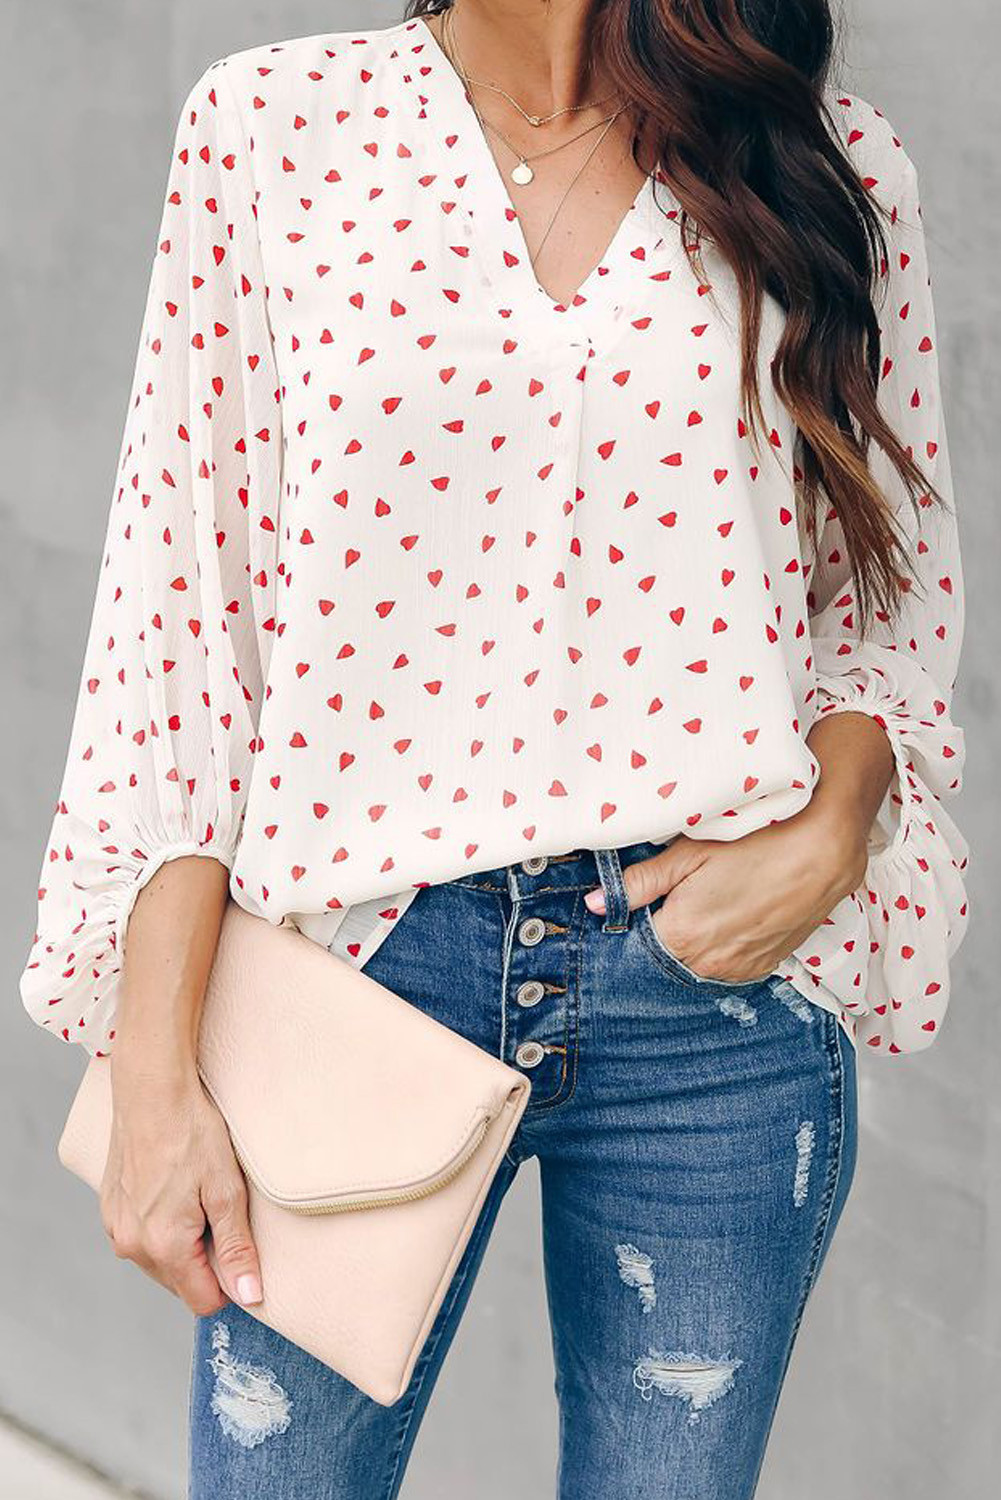 Plus Size So Chic - White Love You Boo Blouse